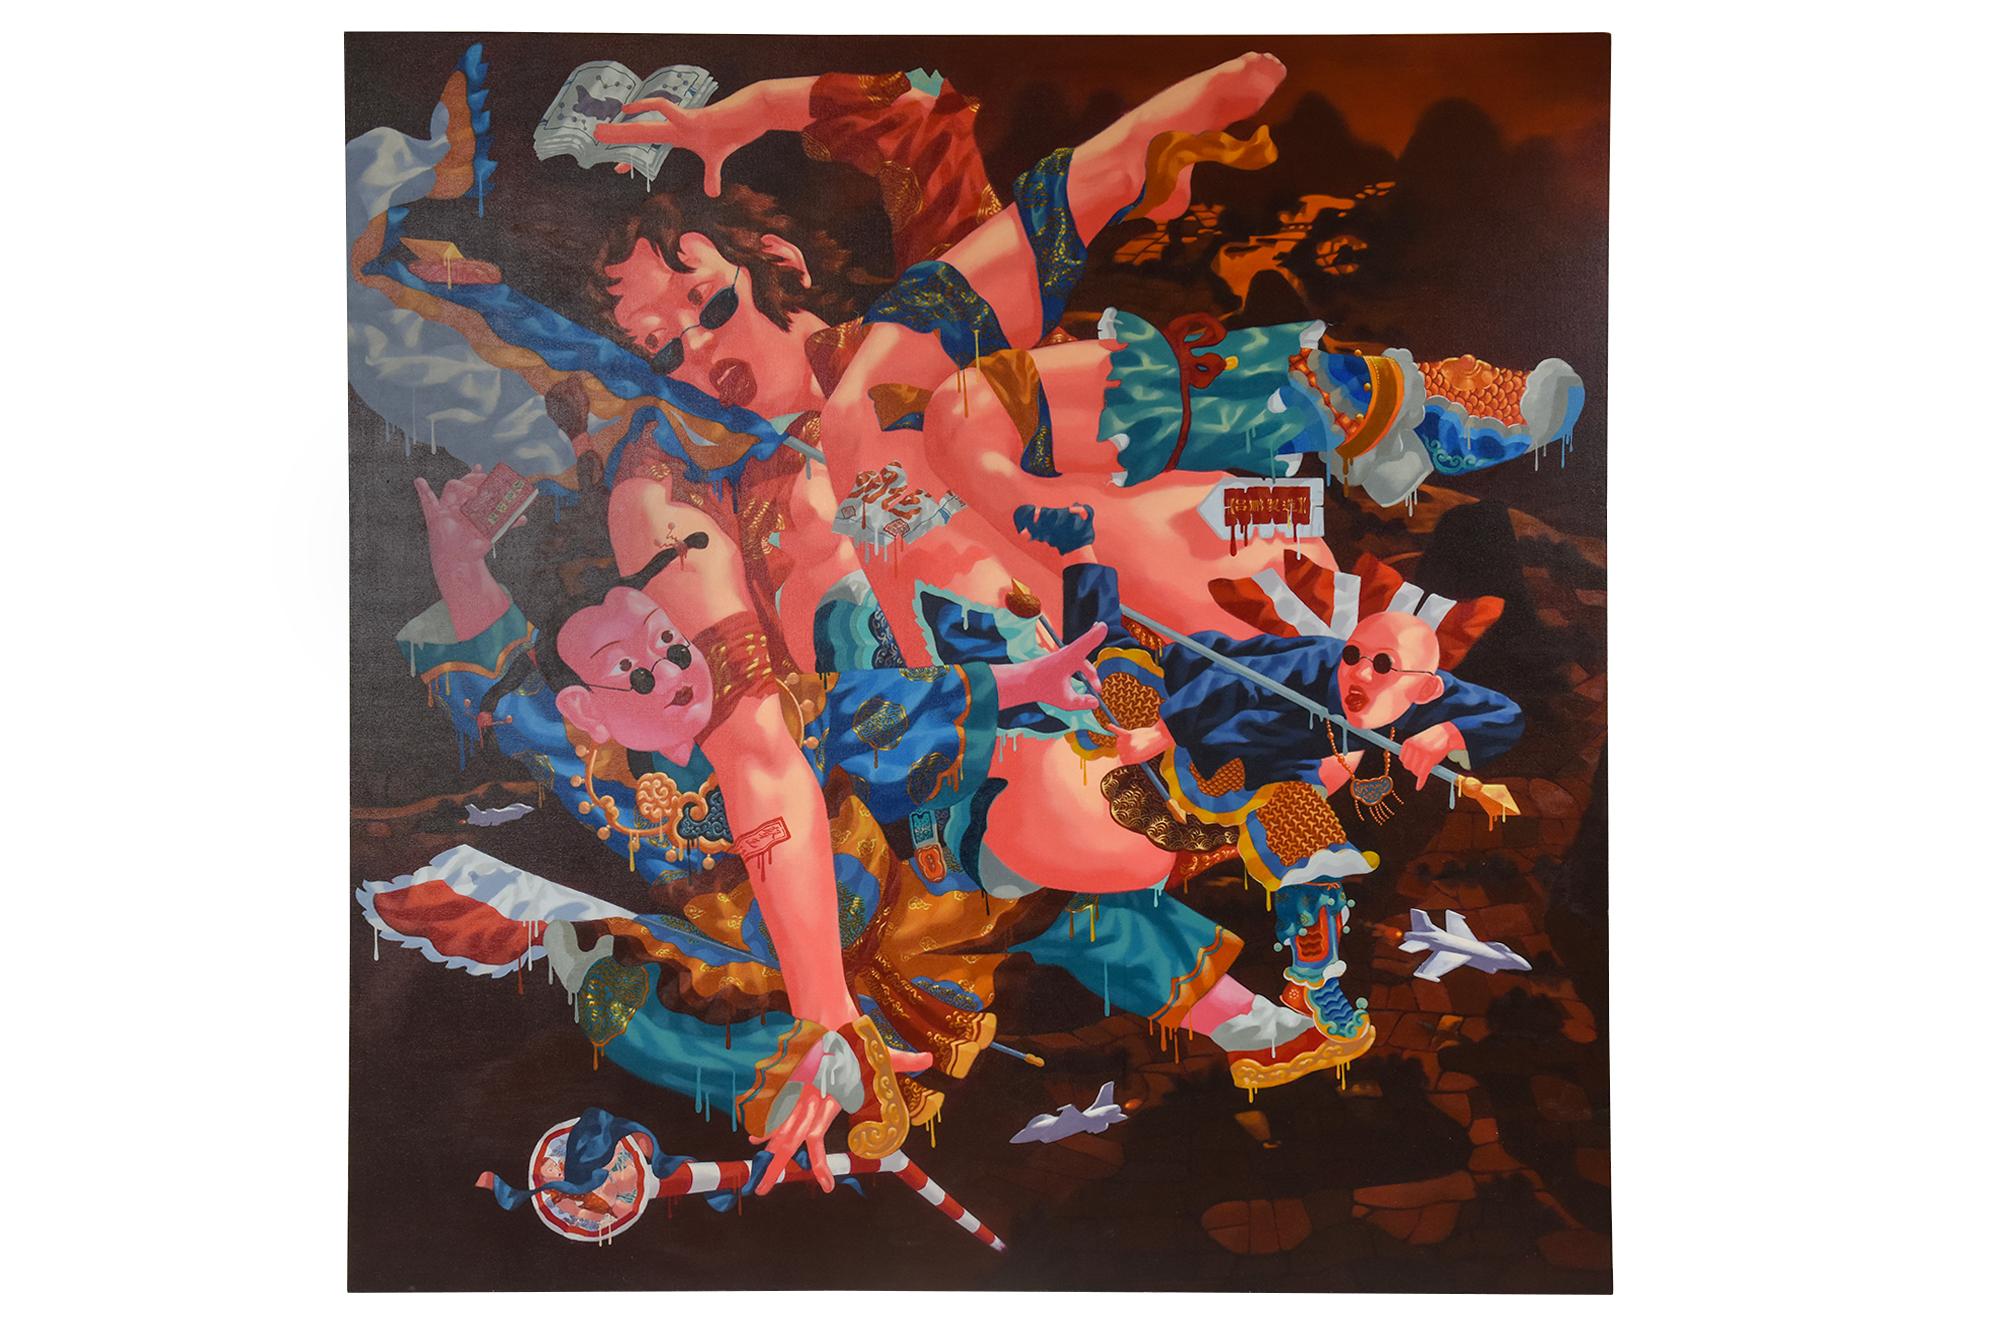 This large and colorful acrylic painting by the noted artist and painter Lu Peng is titled 